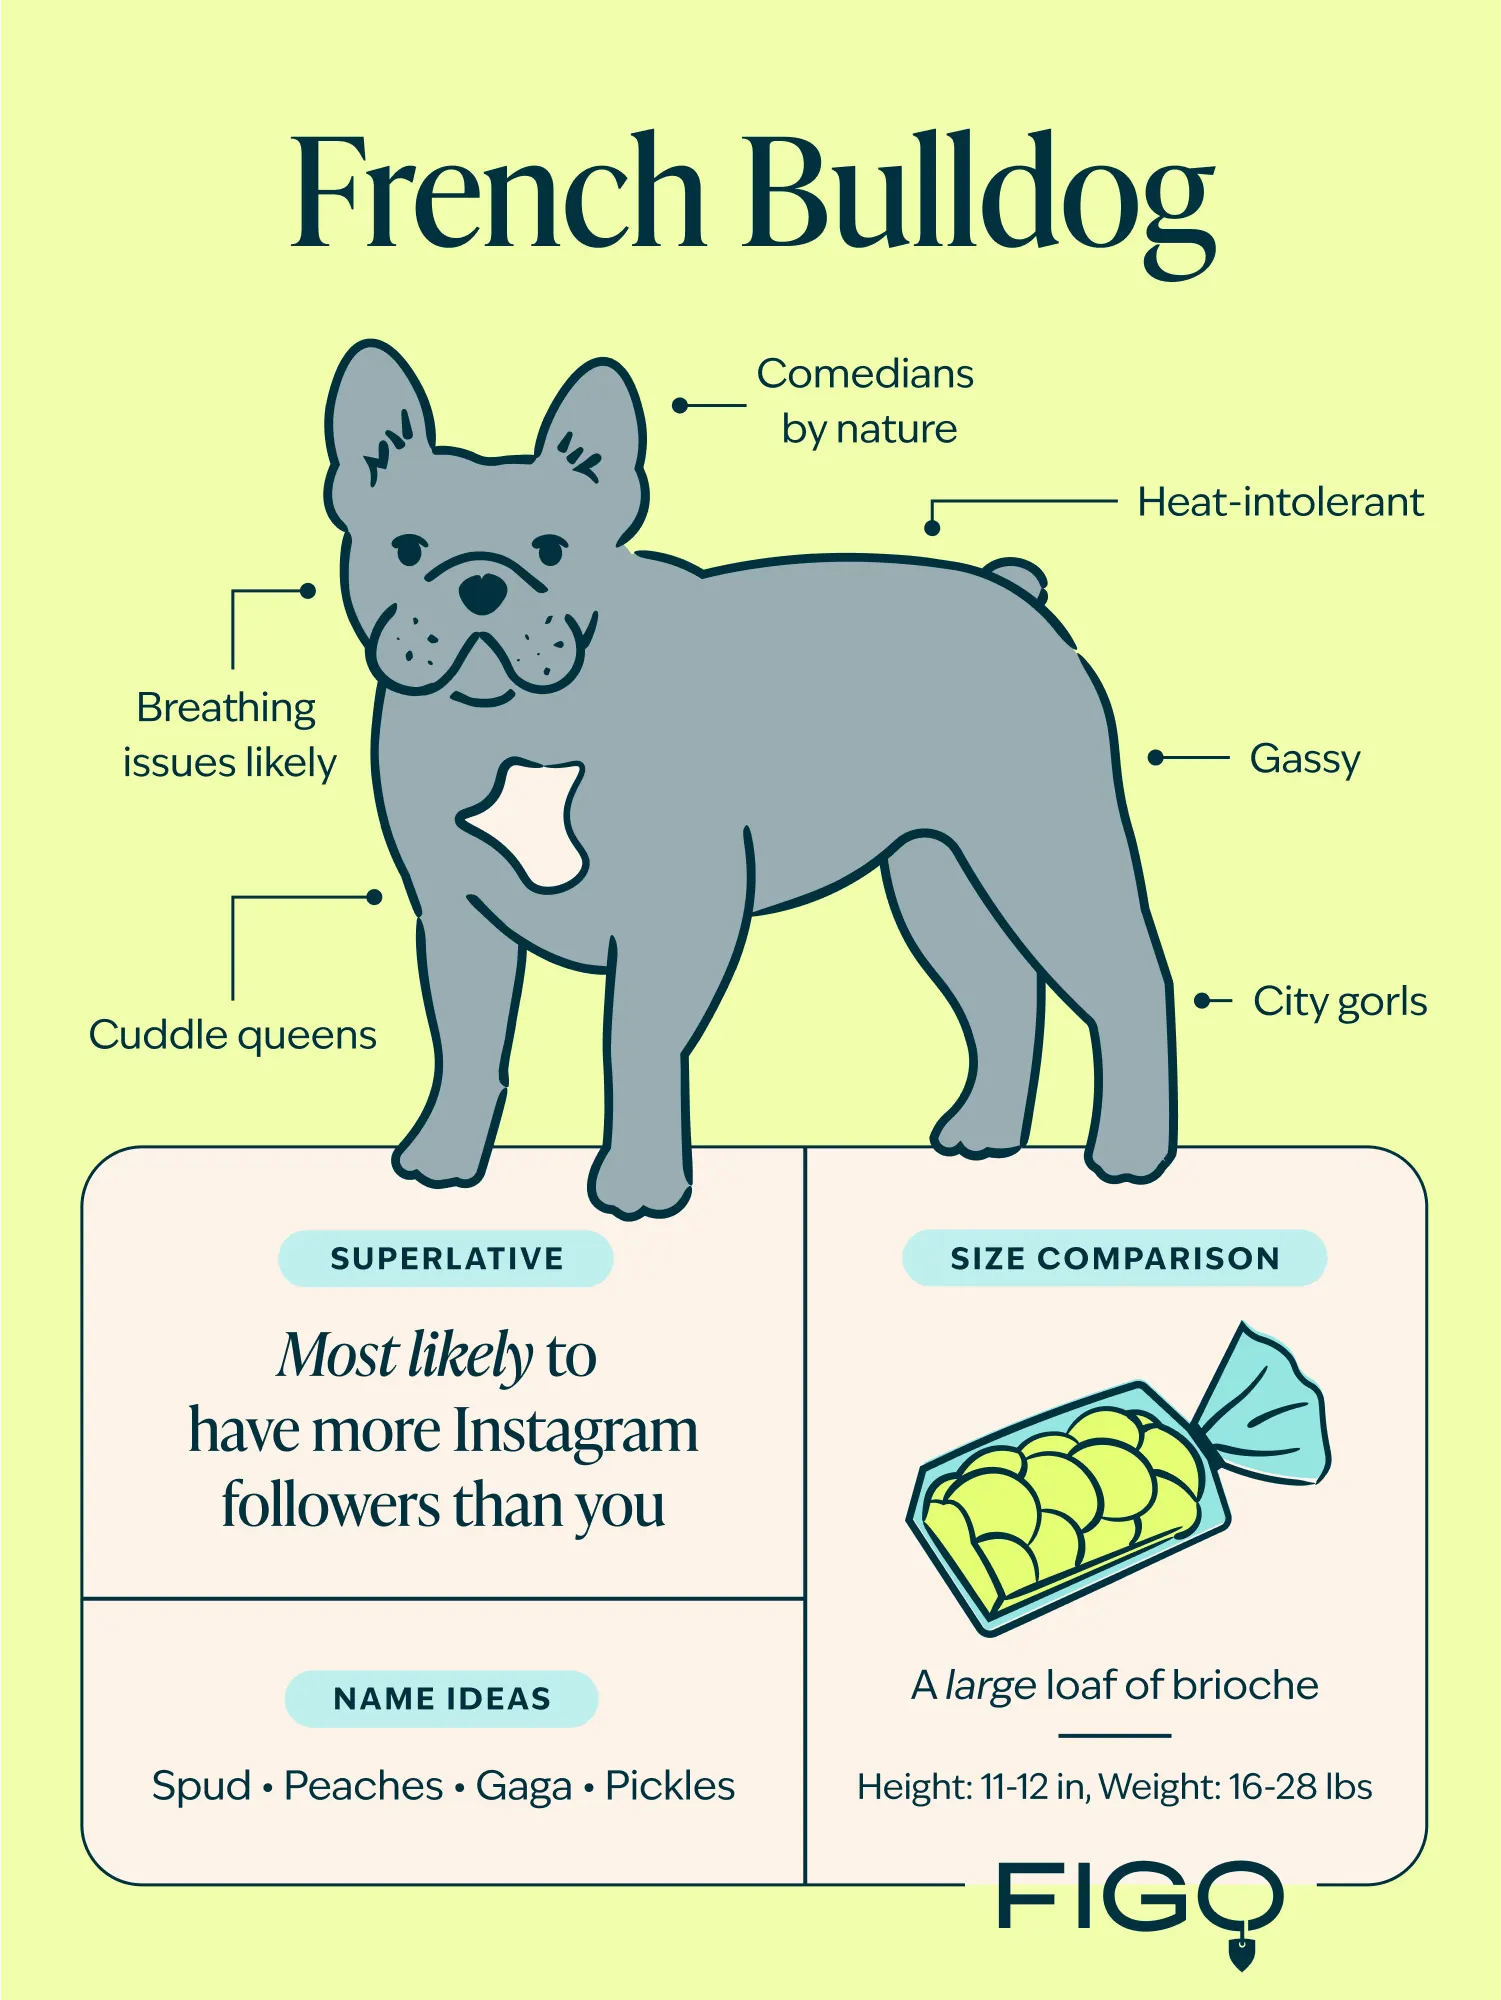 French Bulldog Breed Guide Infographic